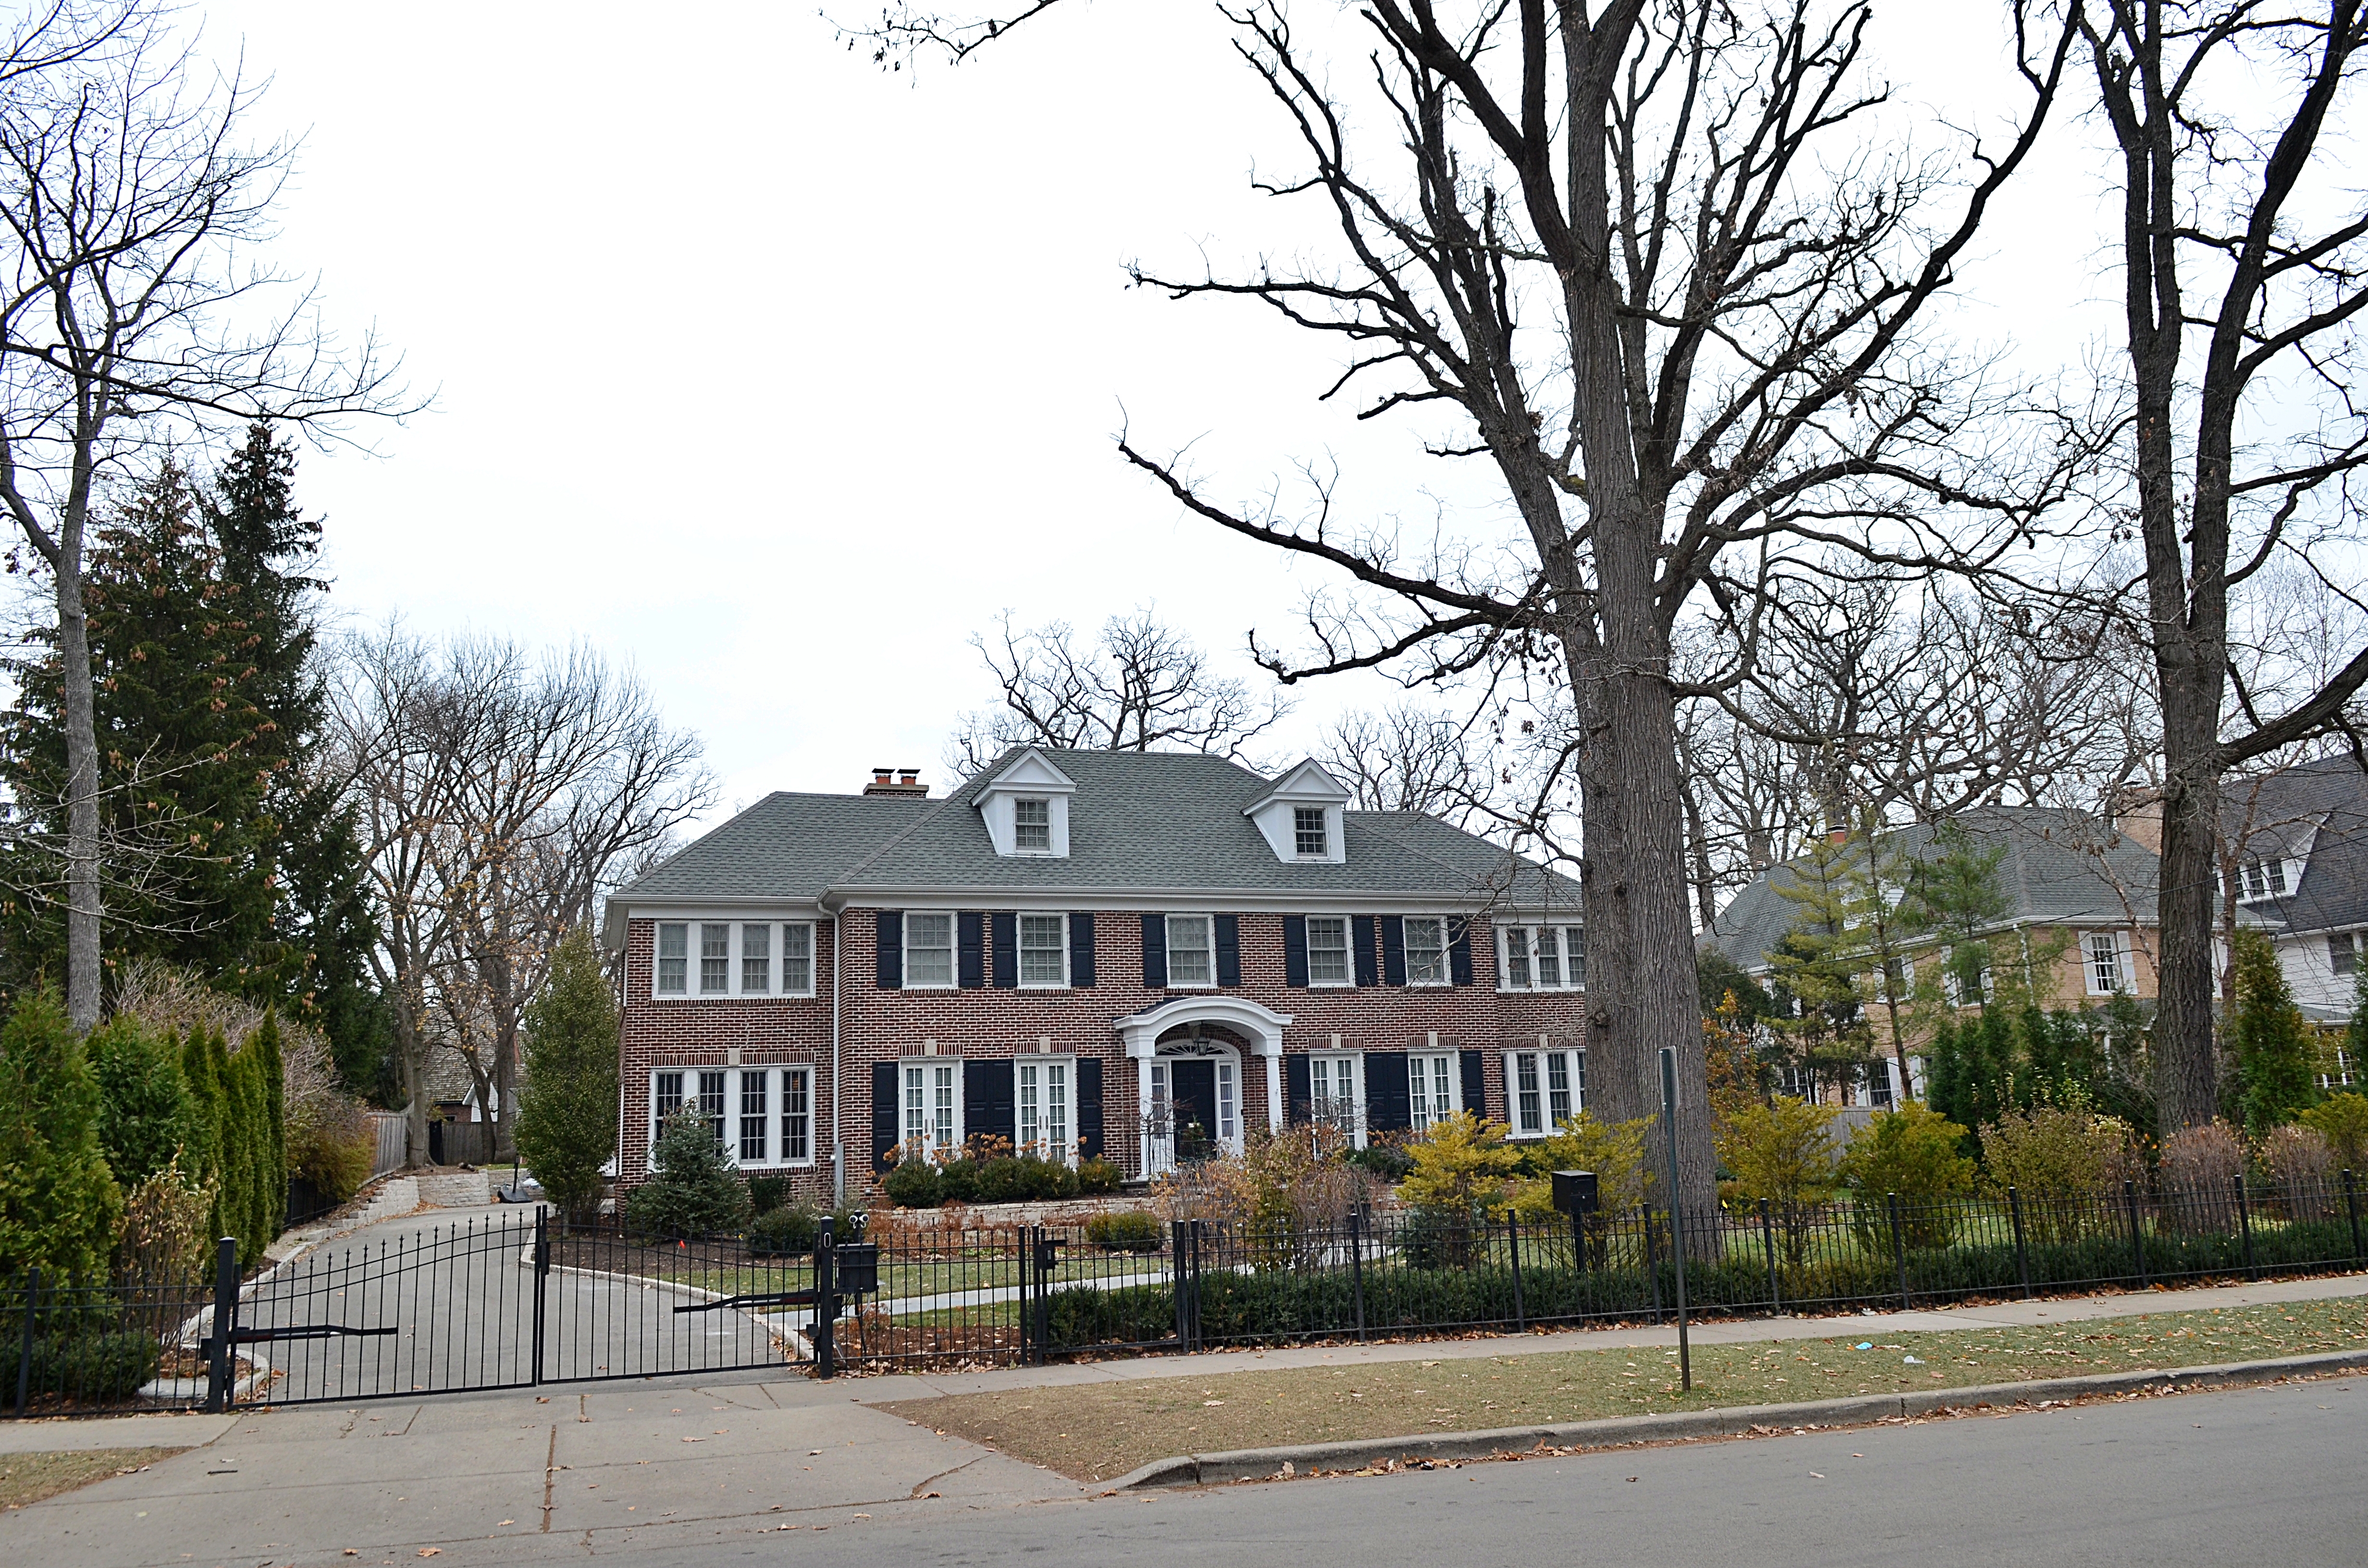 The real life "Home Alone" house in Winnetka, Illinois on December 1, 2021 | Source: Getty Images